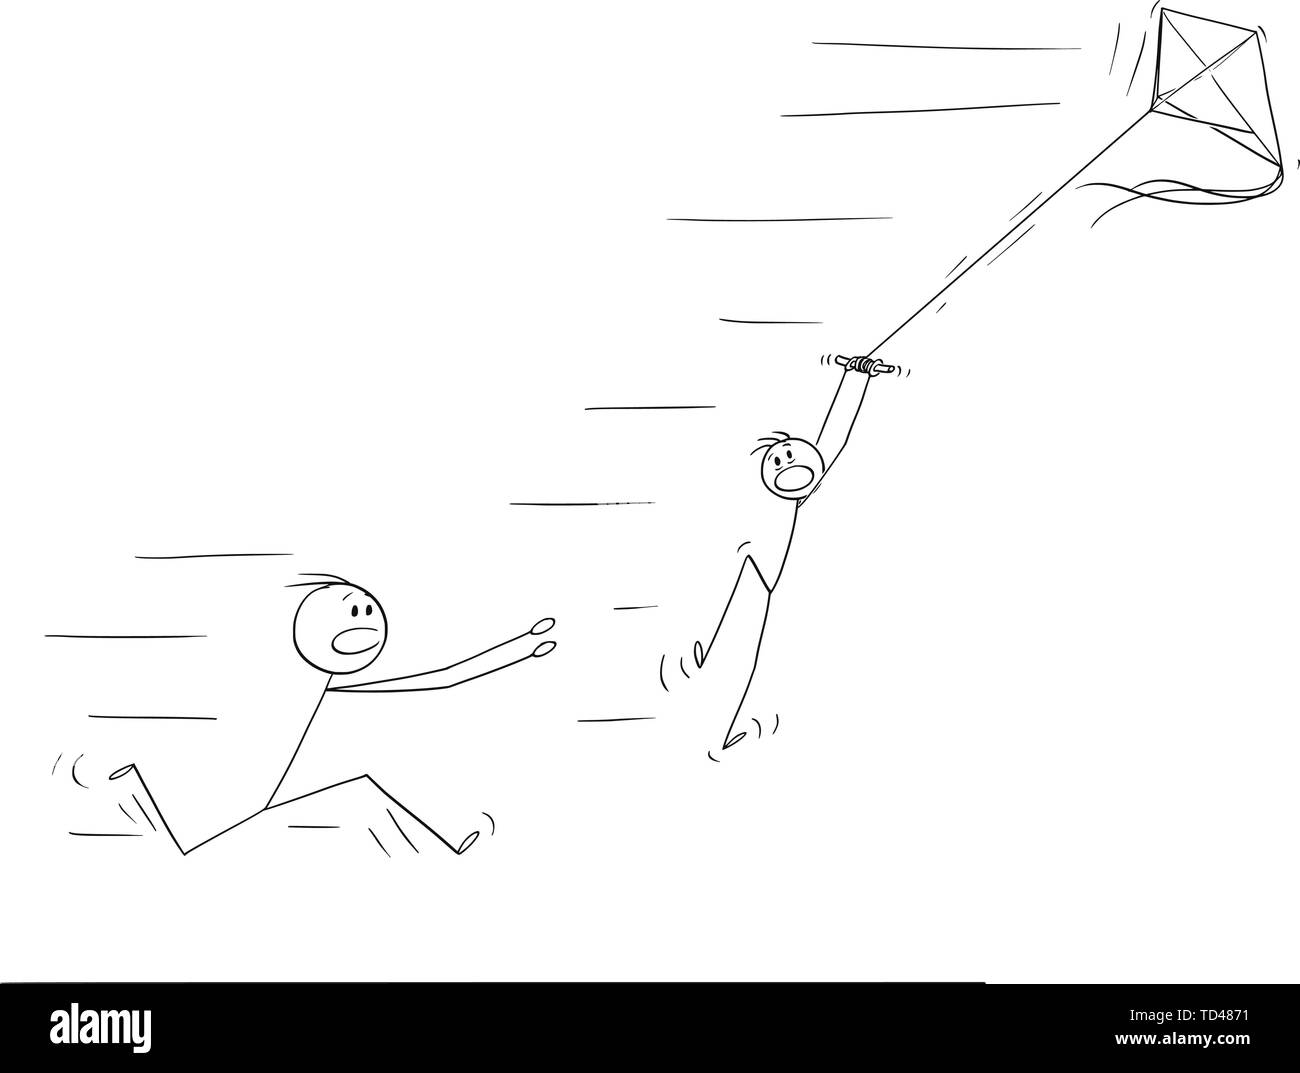 Vector cartoon stick figure drawing conceptual illustration of boy flying kite and flying away in strong wind. Father is running to save him. Stock Vector